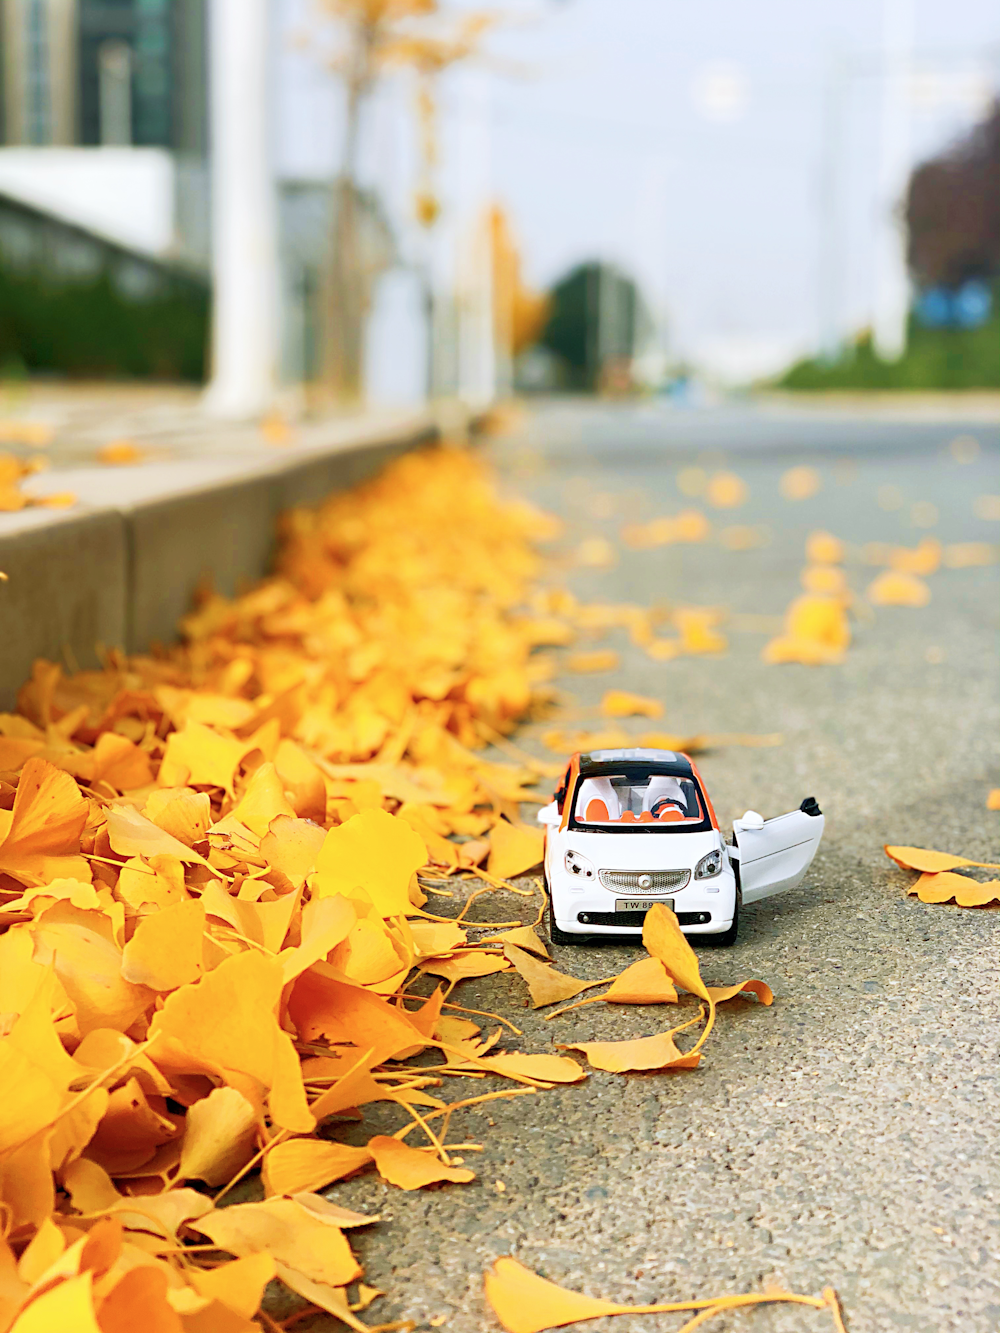 white and black car on road with dried leaves during daytime